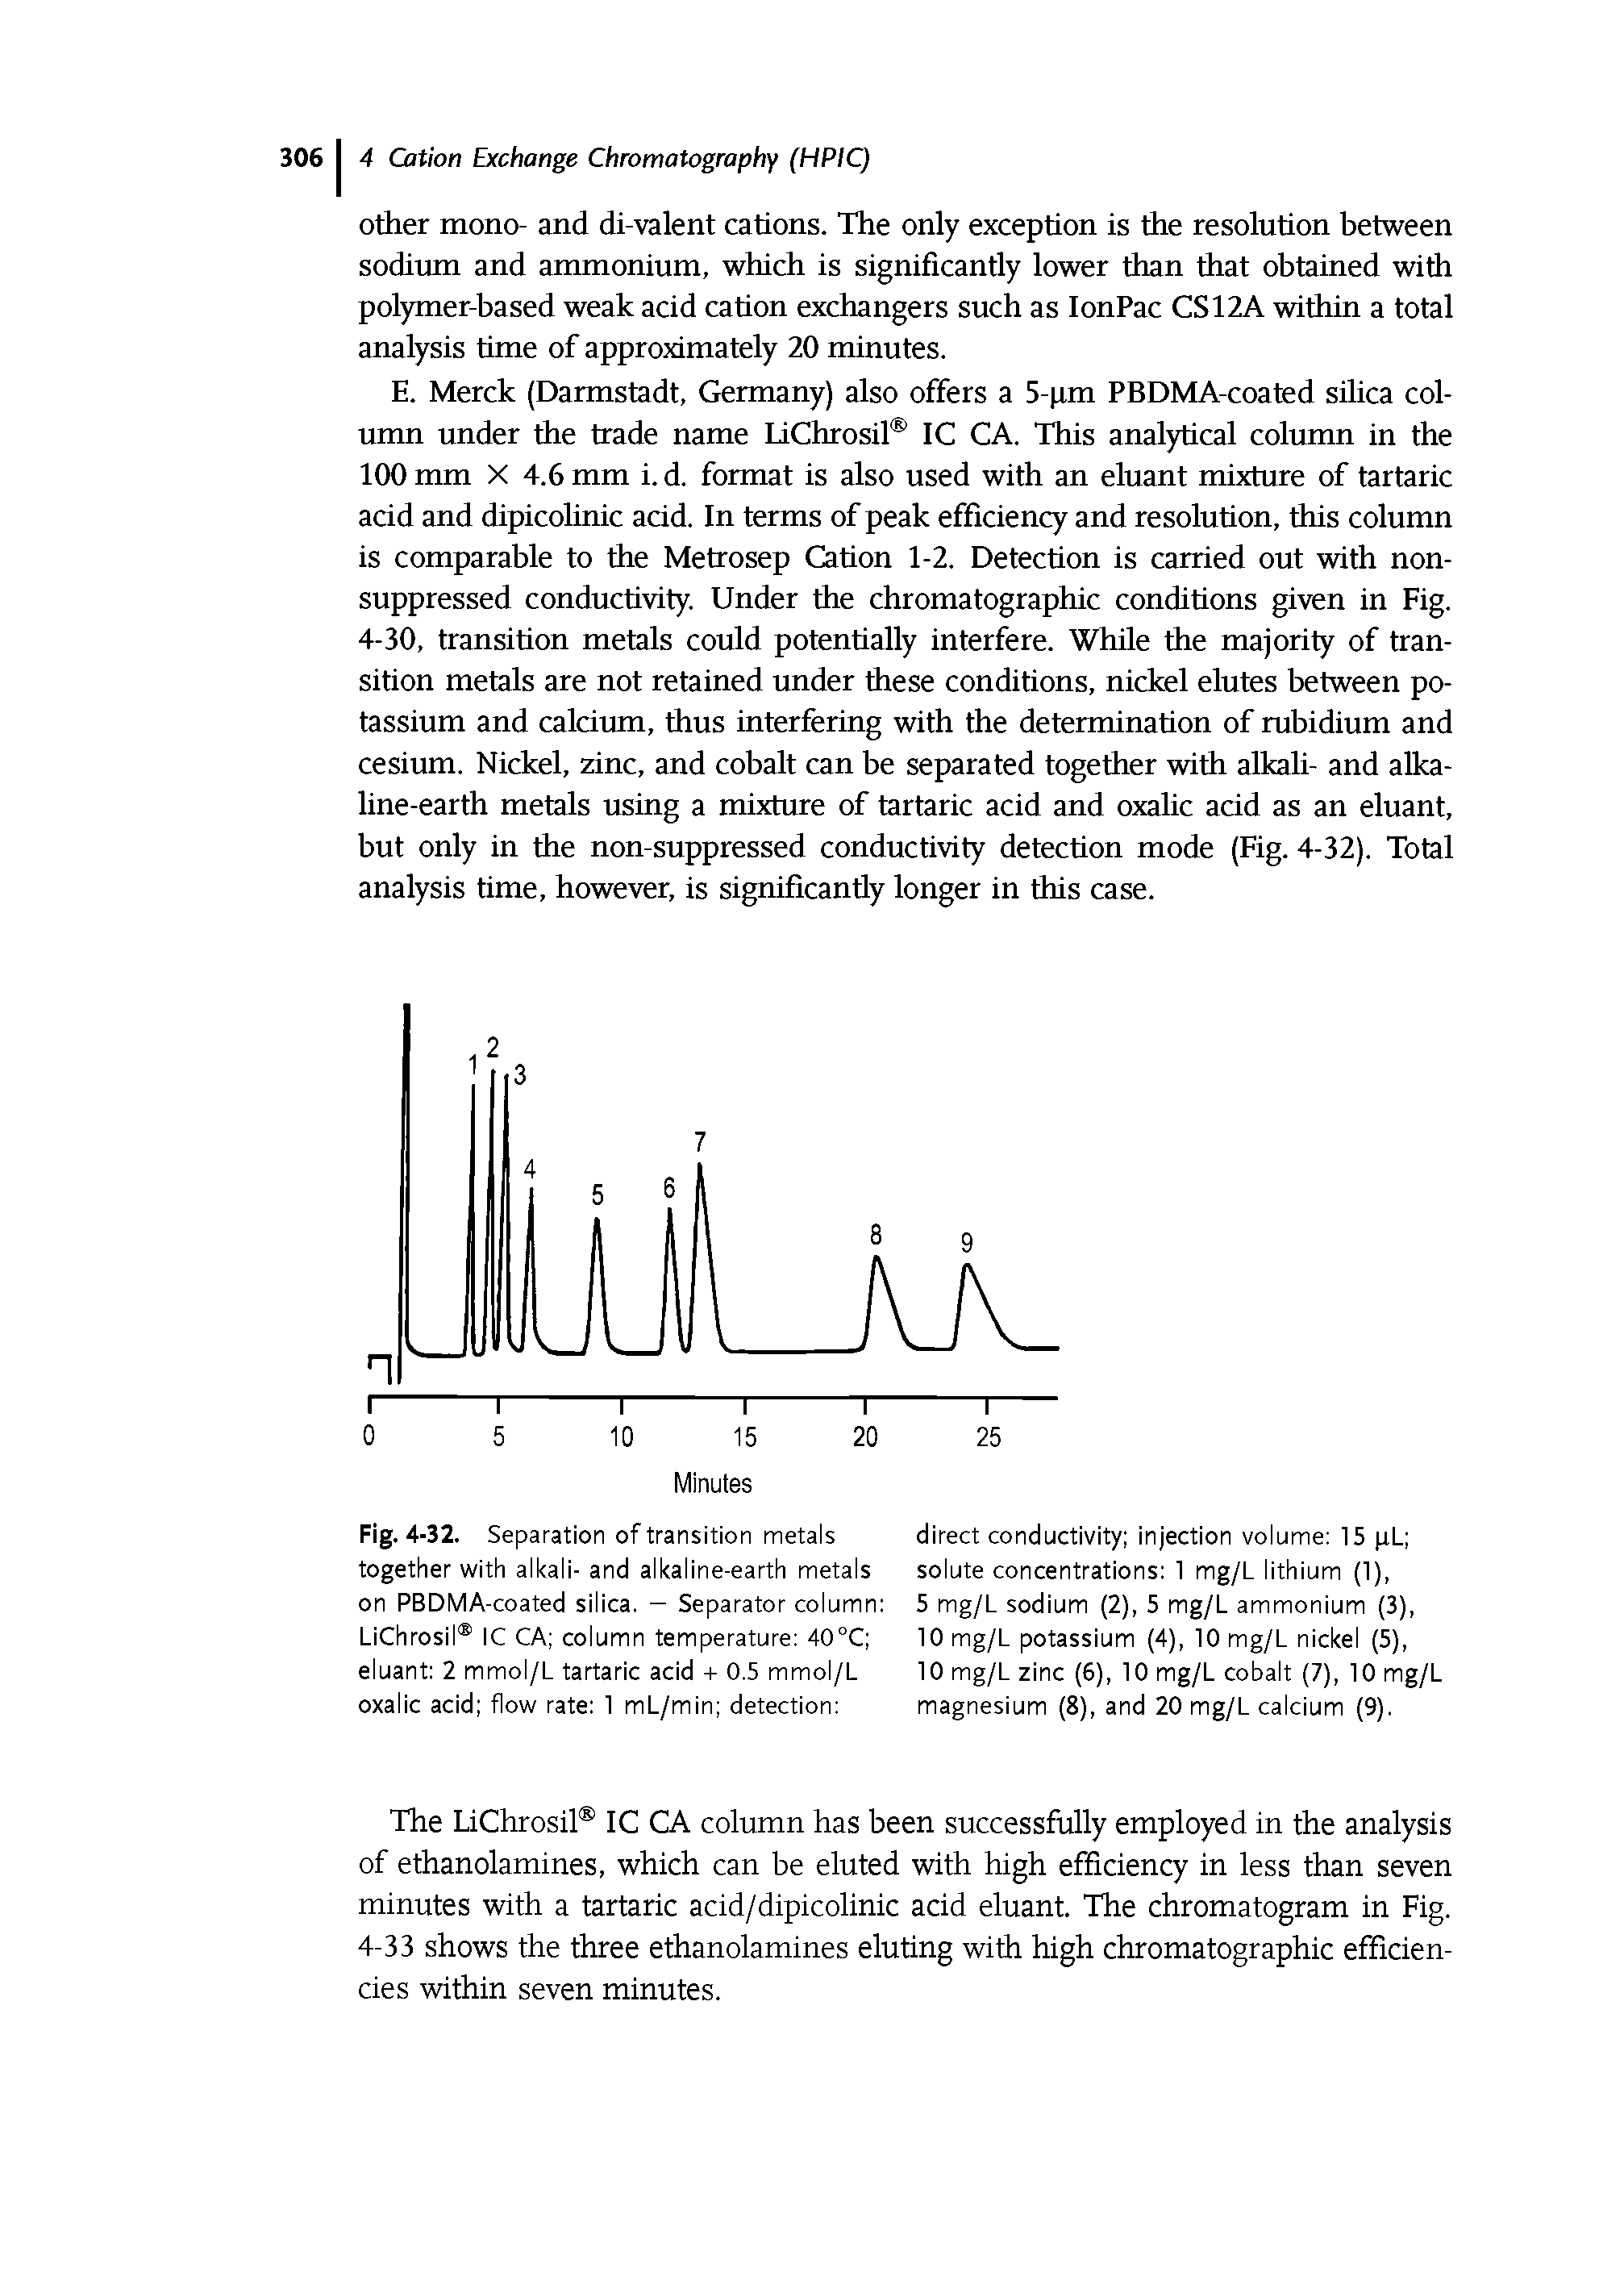 Fig. 4-32. Separation of transition metals together with alkali- and alkaline-earth metals on PBDMA-coated silica. - Separator column LiChrosil IC CA column temperature 40°C eluant 2 mmol/L tartaric acid a- 0.5 mmol/L oxalic acid flow rate 1 mL/min detection ...